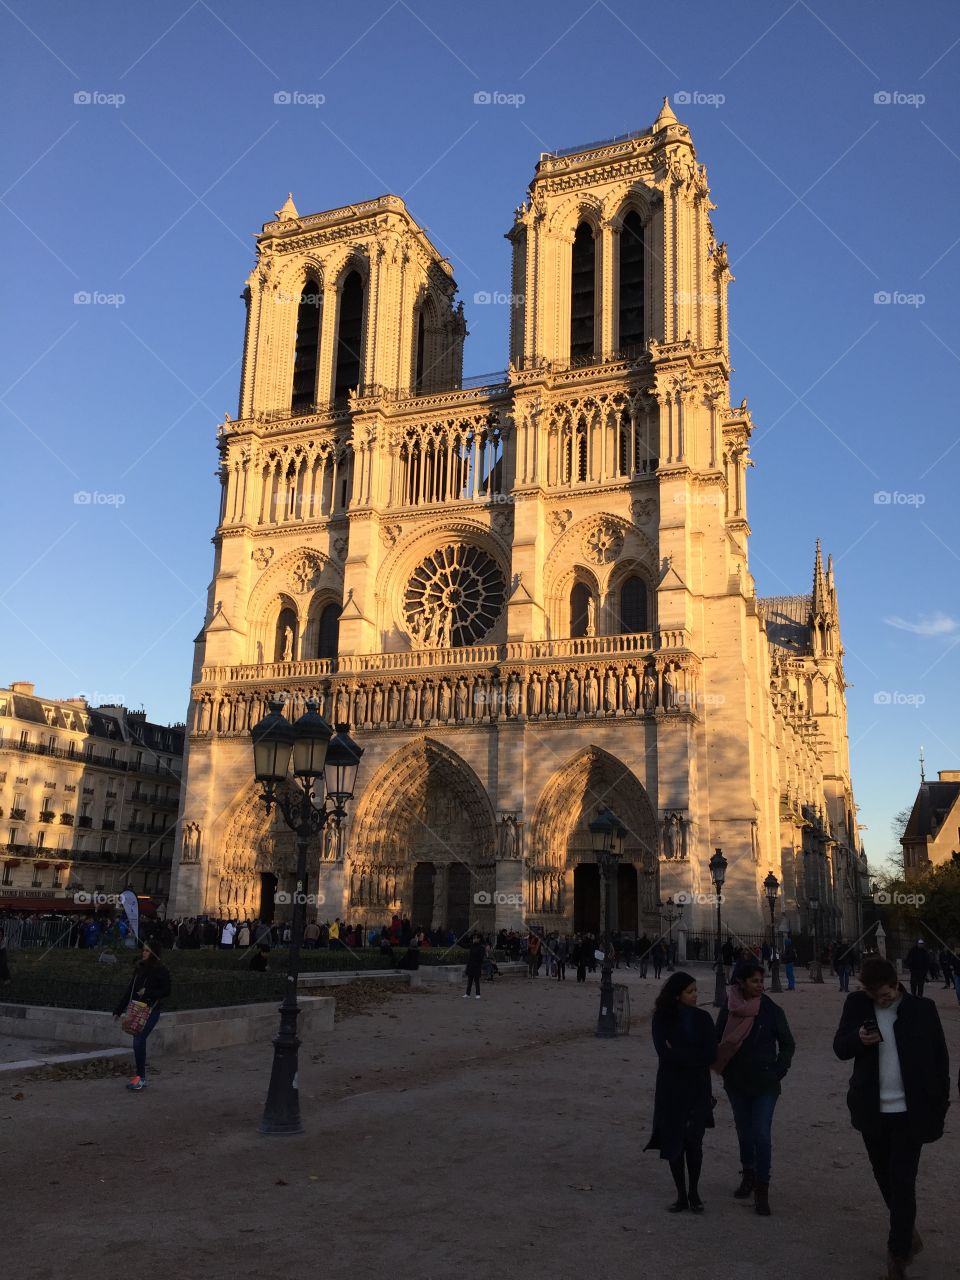 The beautiful Notre Dame de Paris.  Most famous catholic cathedral. It's one of the largest church buildings in the world. 